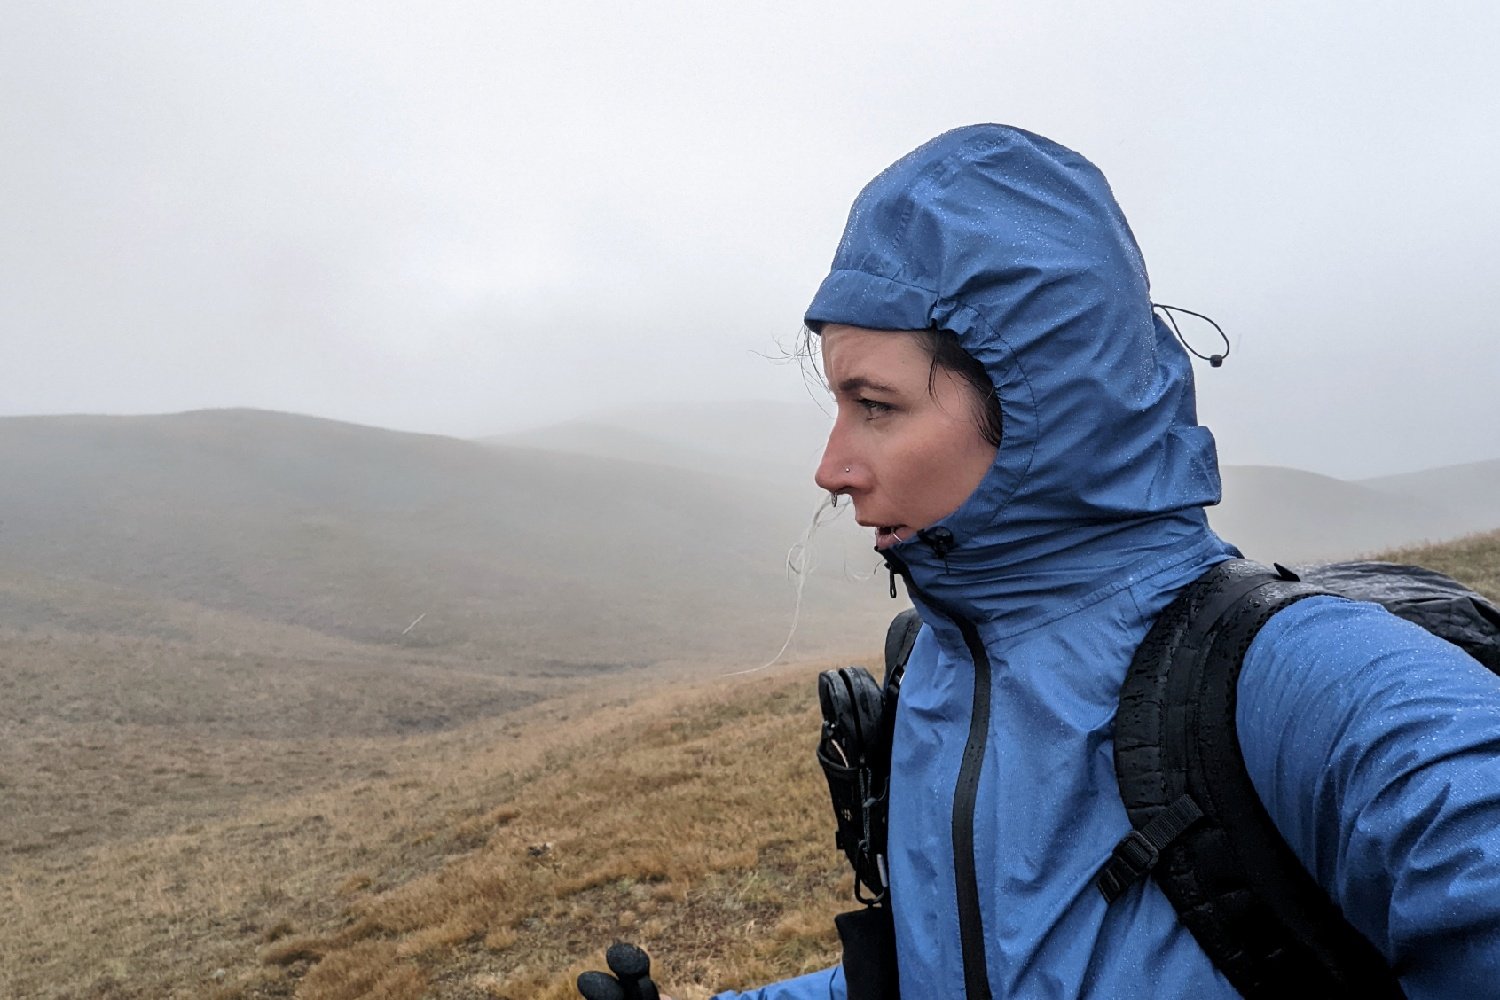 A hiker wearing a rain jacket with a hood in rainy weather on the Colorado Trail